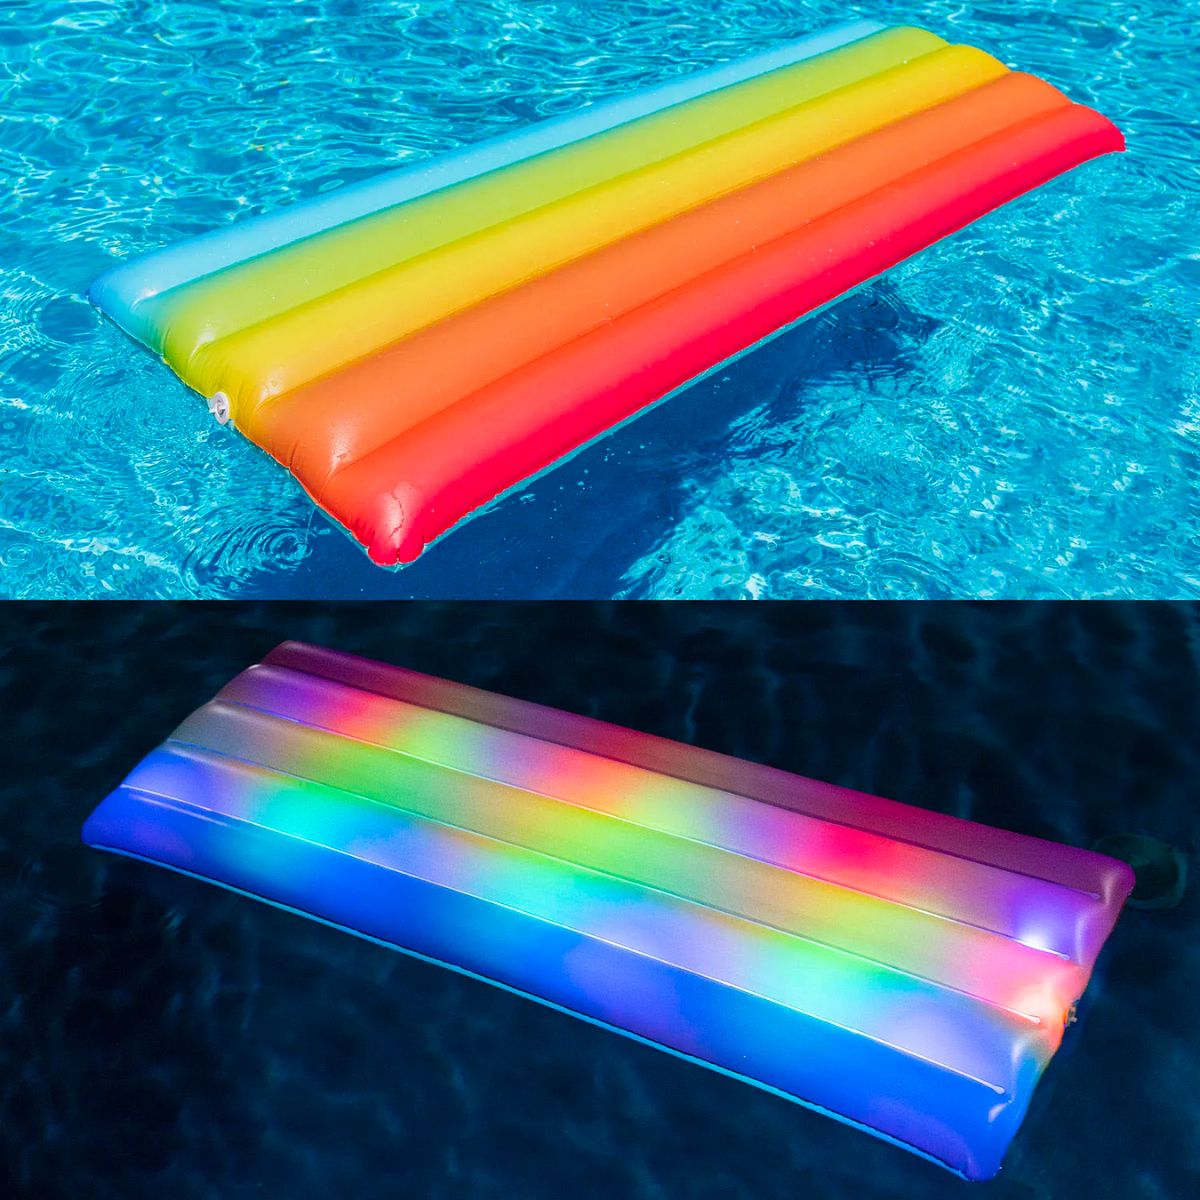 Good Vibes Rainbow Collection Illuminated LED Deluxe Pool Raft with Pillow